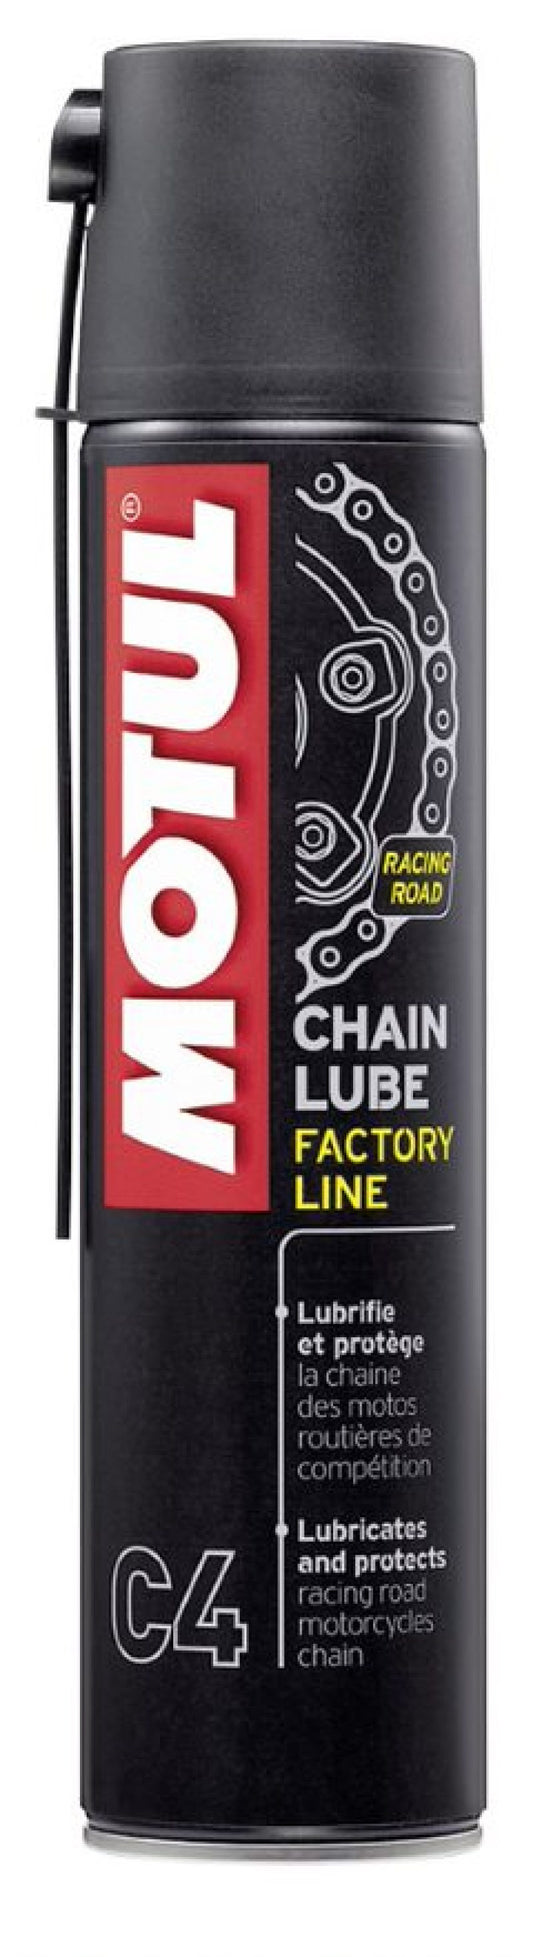 Motul .400L Cleaners C4 CHAIN LUBE FACTORY LINE Case of 111821